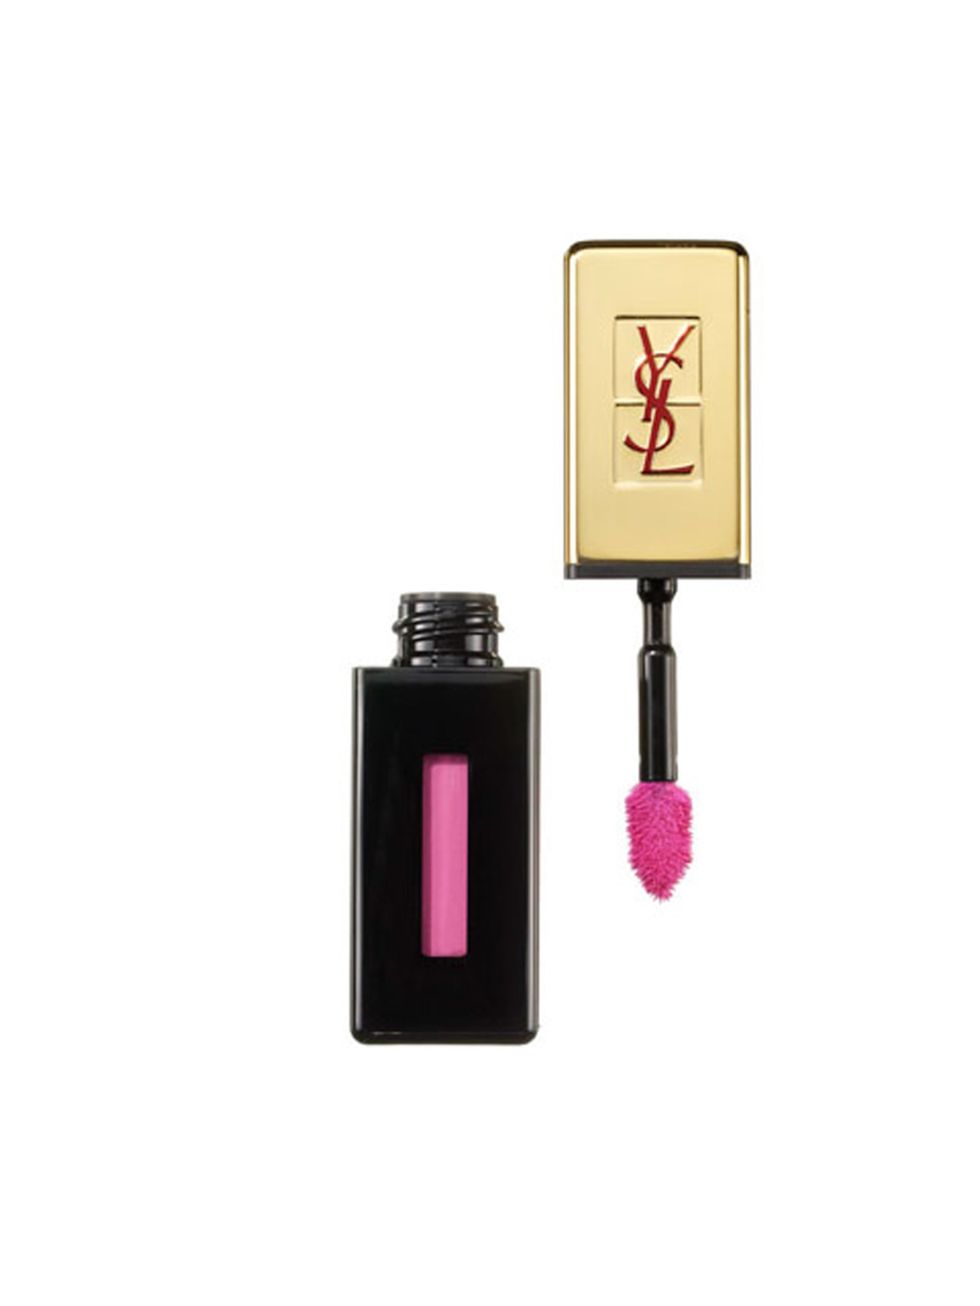 <p><strong>ELLE LOVES:</strong></p><p><a href="http://www.selfridges.com/en/Beauty/Brand-rooms/Designer/YVES-SAINT-LAURENT/Whats-new/Rouge-pur-Couture-Glossy-Stain-lip-stain_456-84033258-RPCGLOSSYSTAIN/">YSL Rouge pur Couture Glossy Lip Stain in 17, £23.5